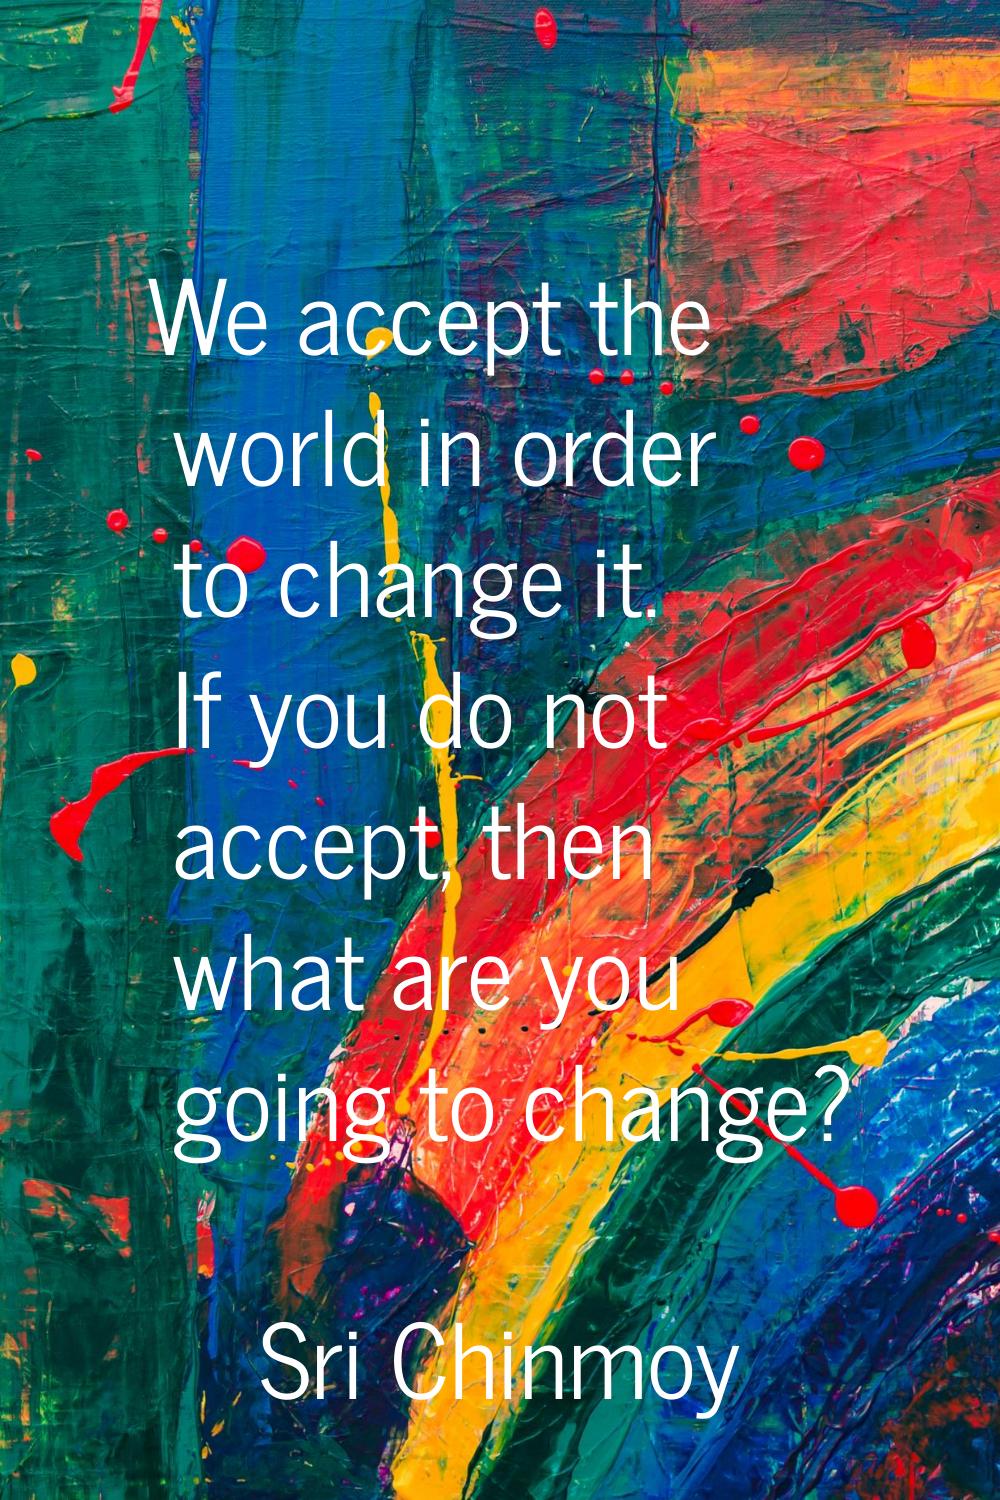 We accept the world in order to change it. If you do not accept, then what are you going to change?